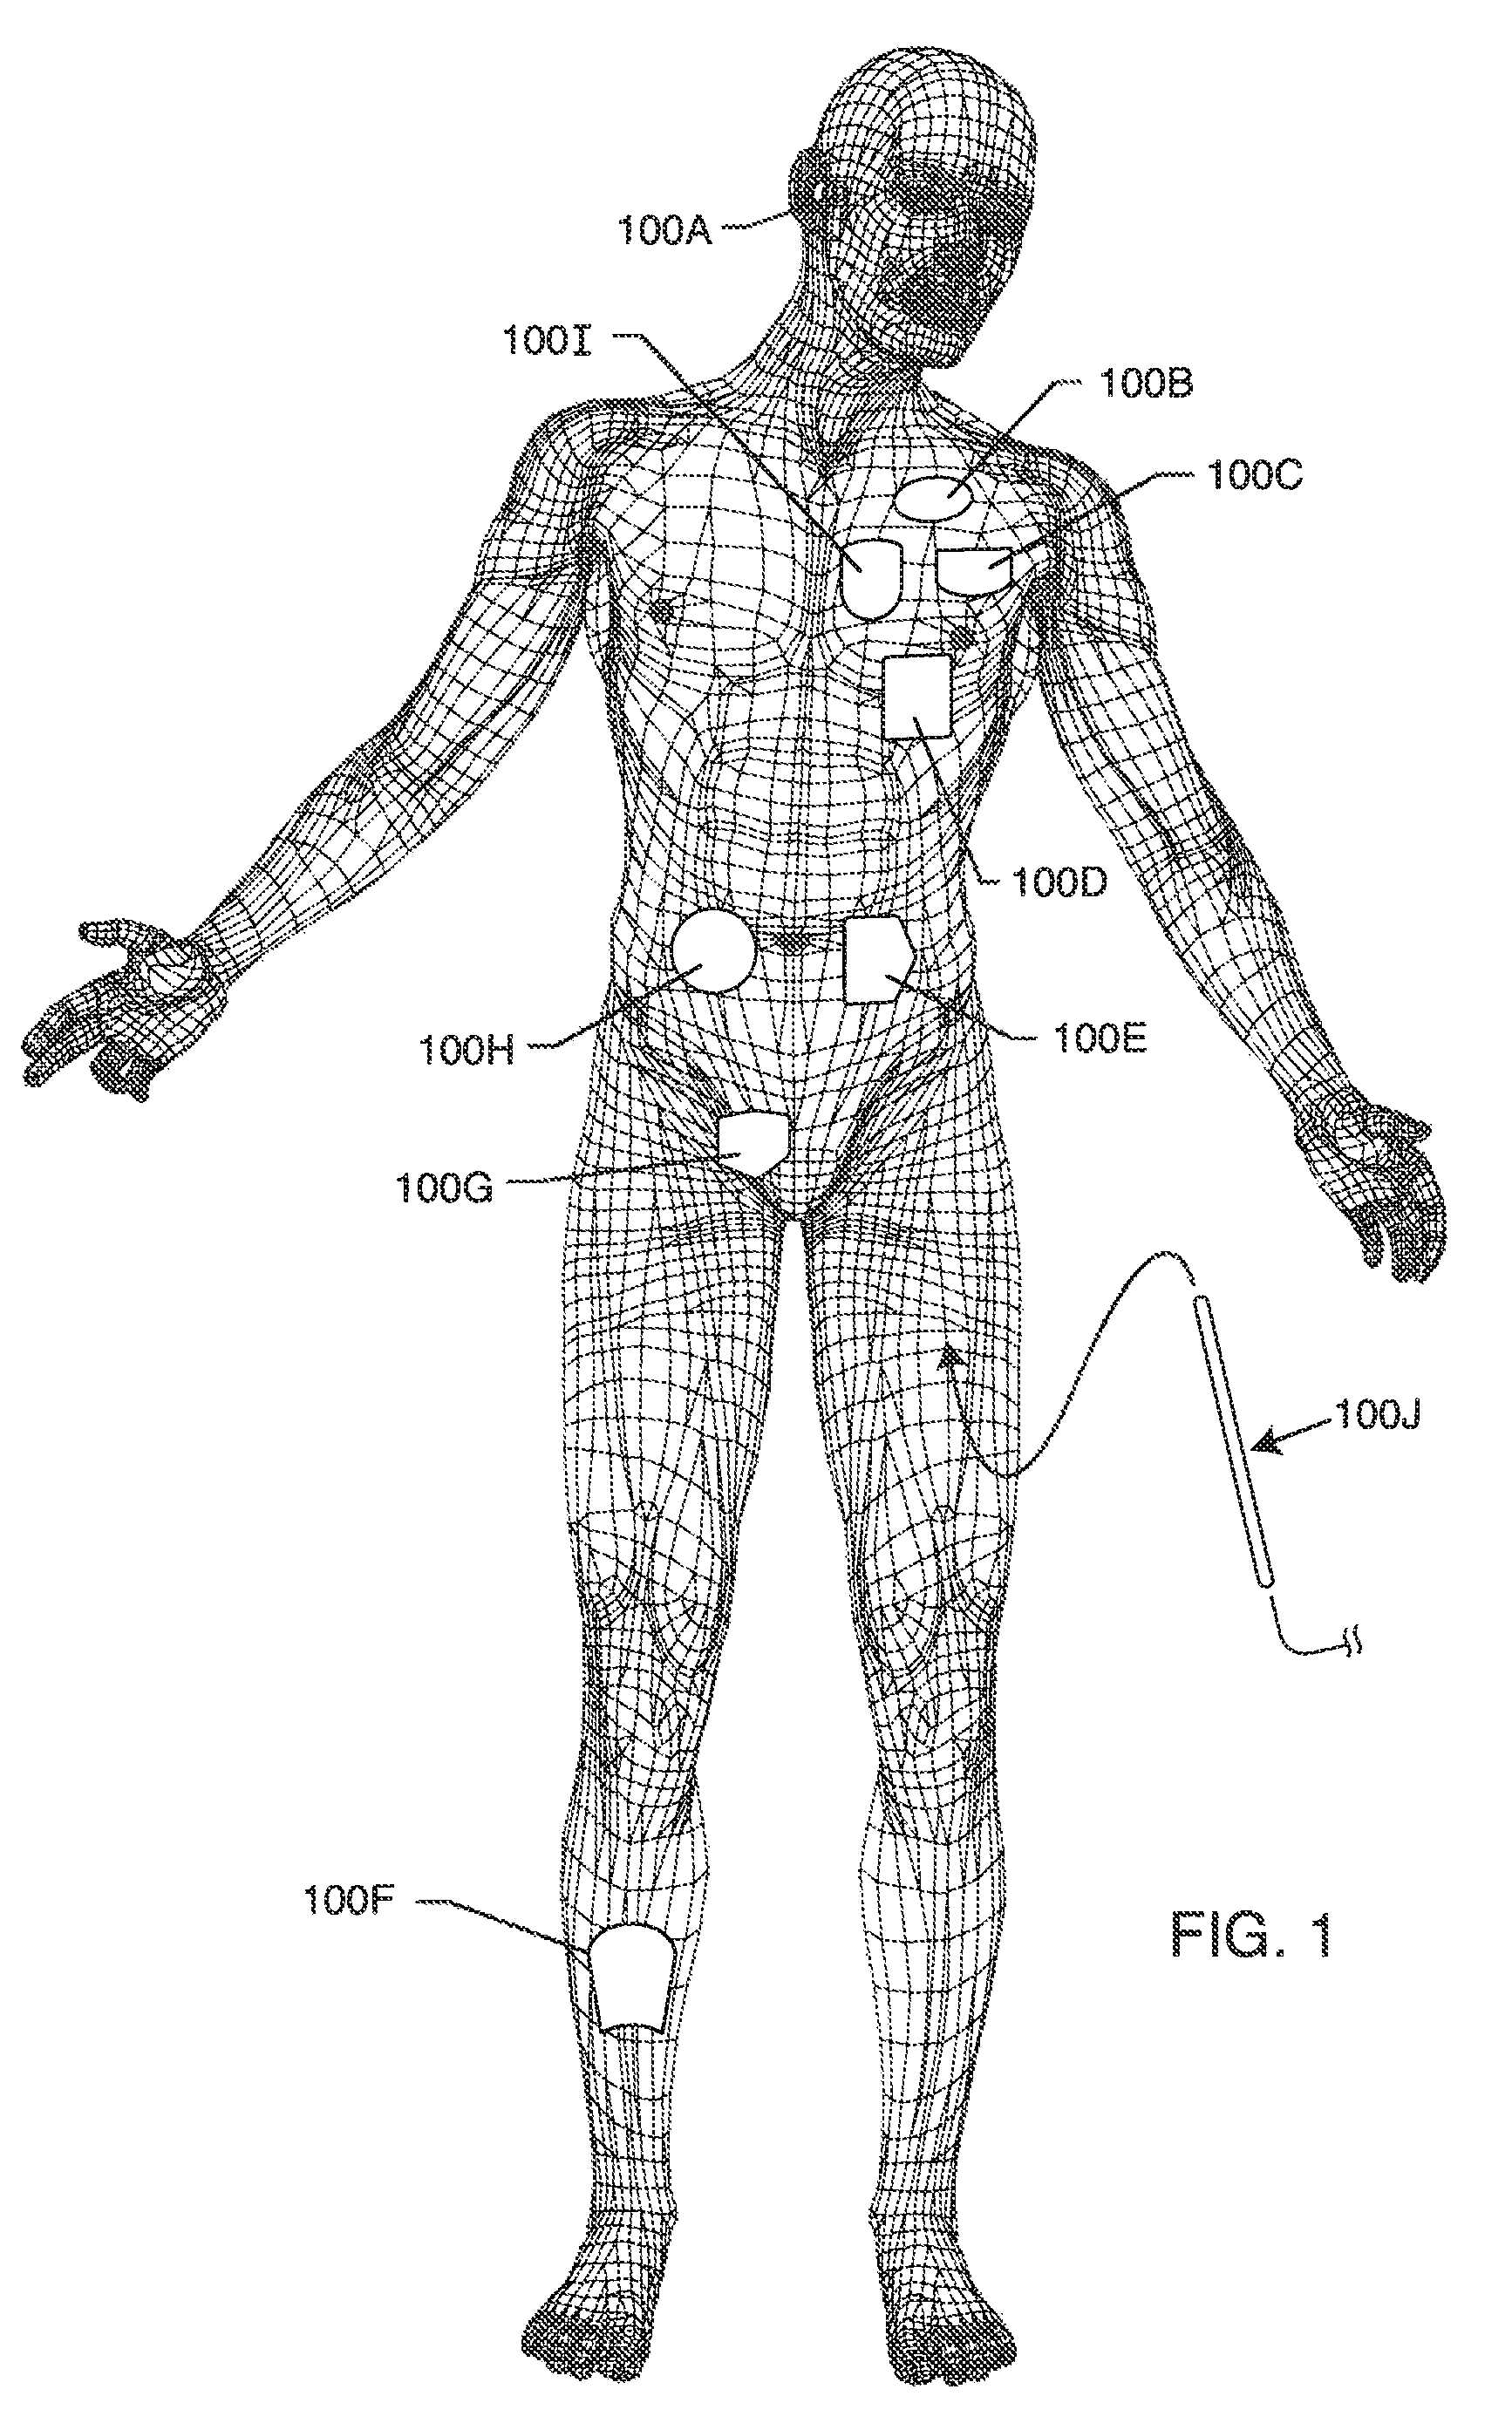 Electromagnetic shield for a passive electronic component in an active medical device implantable lead